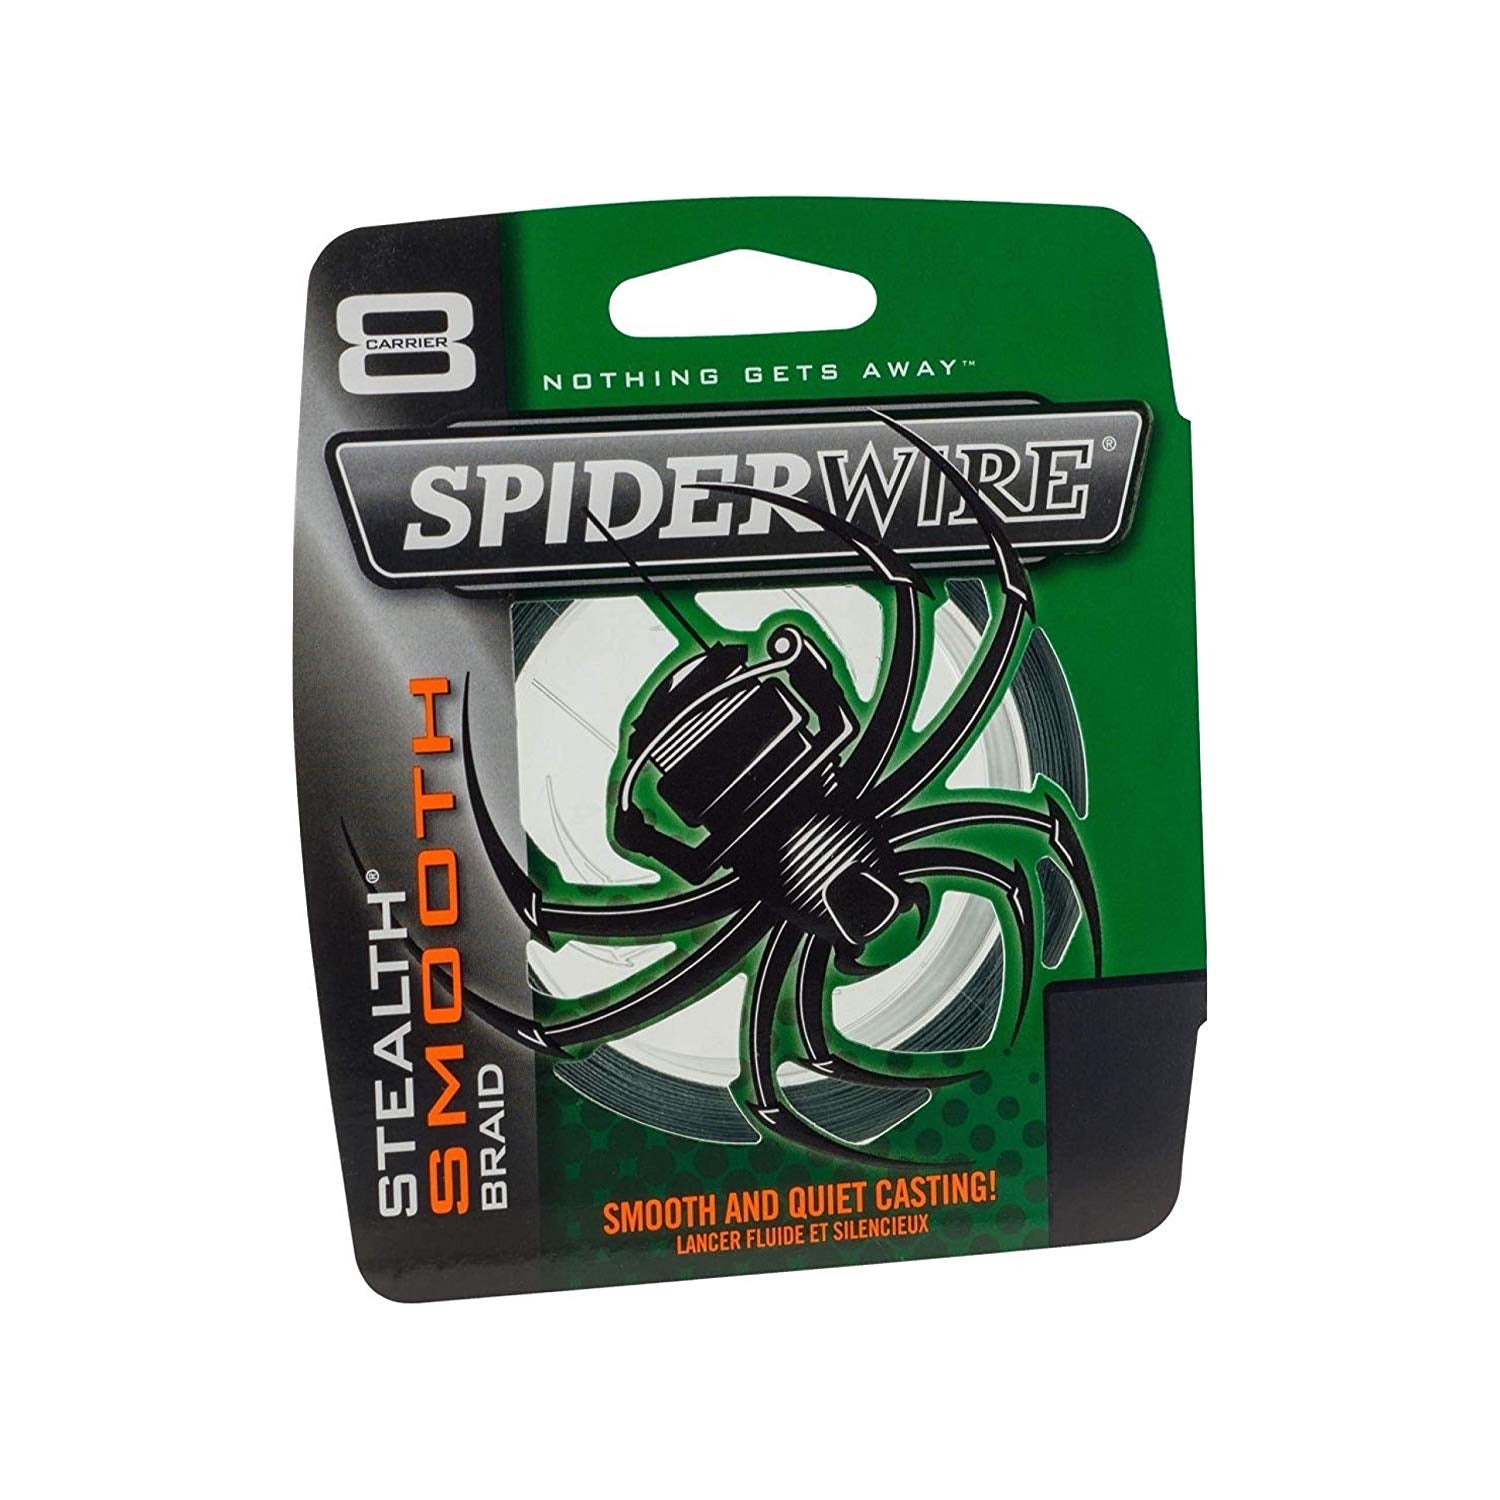 Spiderwire Stealth Braid Fishing Line, Moss Green, 500 yards, 15 lb